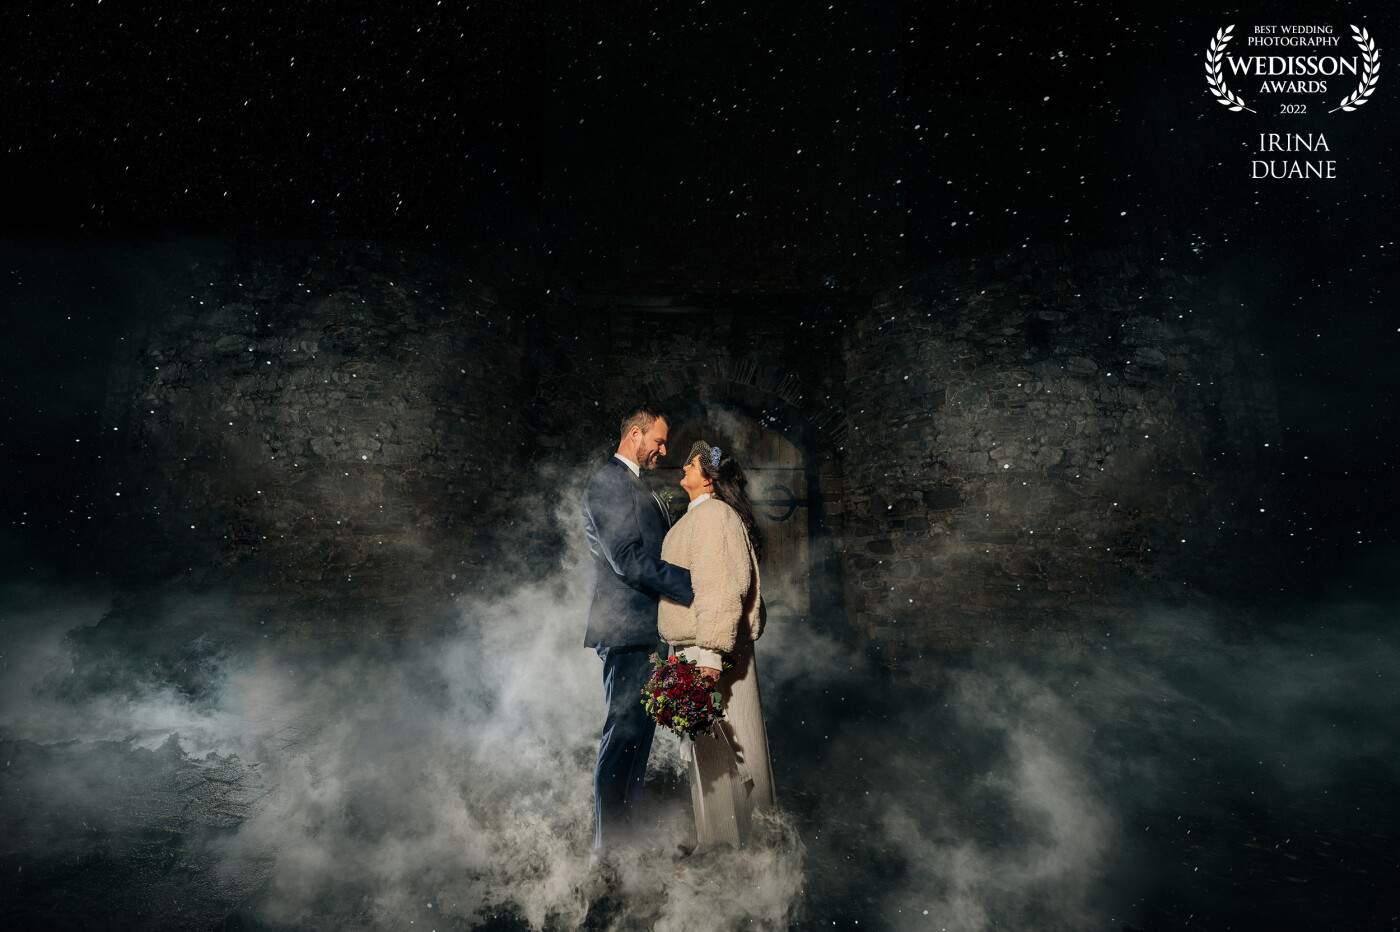 The day went from beautiful blue skies to rain, strong wind and only 5° celsius outside but <br />
that didn’t stop us from getting some amazing wedding photos. In fact we added more elements to it: smoke and fire! <br />
<br />
Smoke bomb photography is amazing way to jazz up your wedding photos! It can turn an ordinary location into a surreal and mysterious beauty.